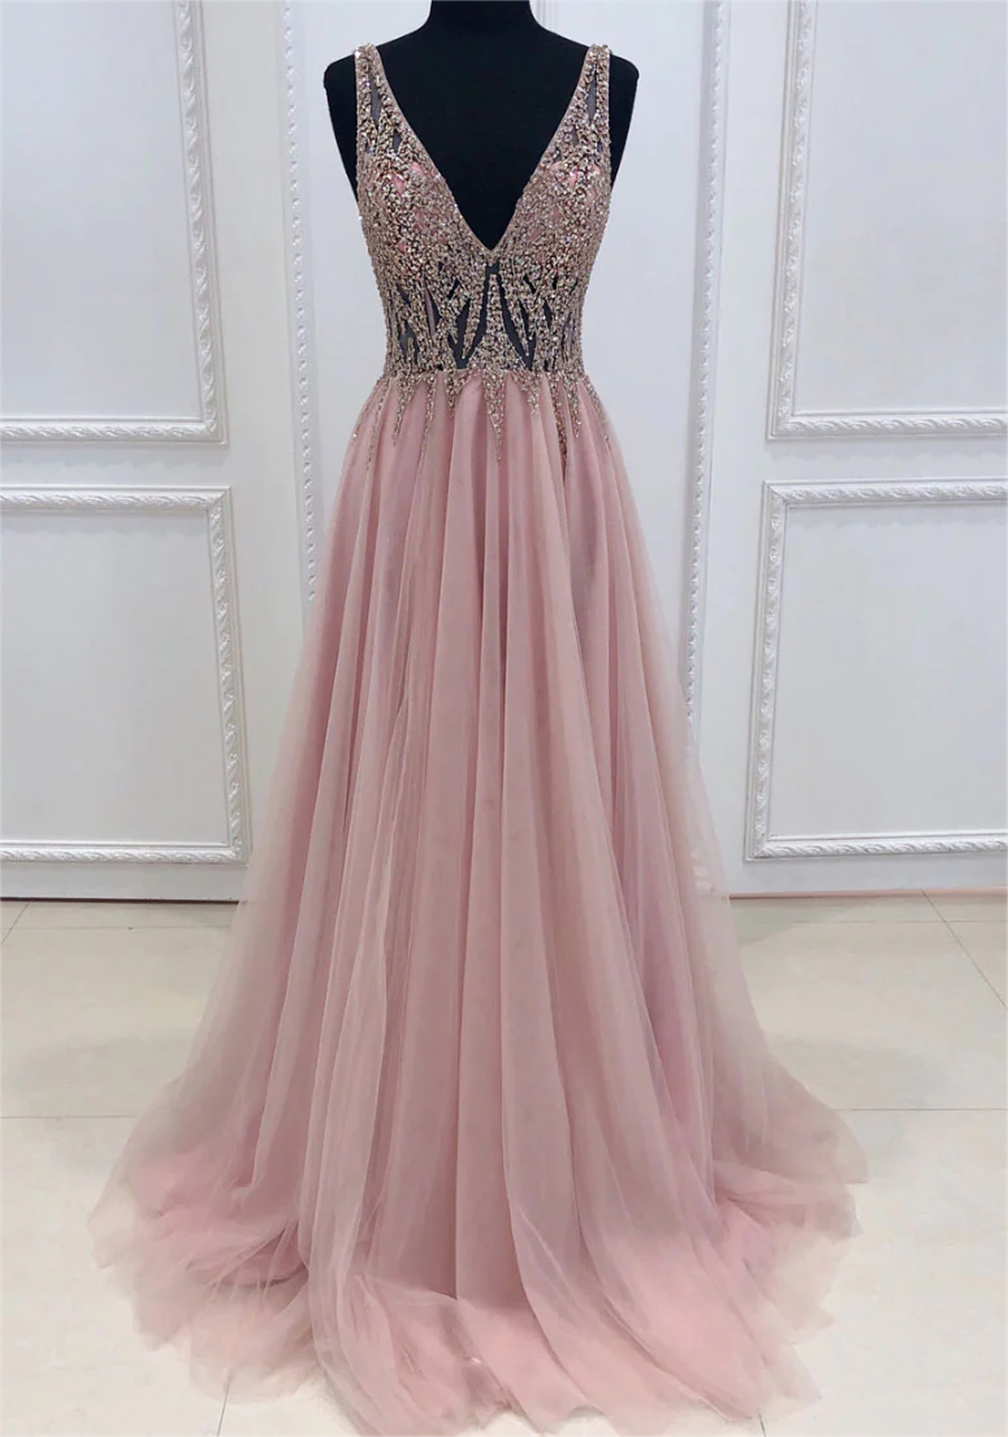 Women A-line Beadings Prom Dresses Long Tulle Beaded Evening Party Gowns Sleeveless Formal Dress Yp094